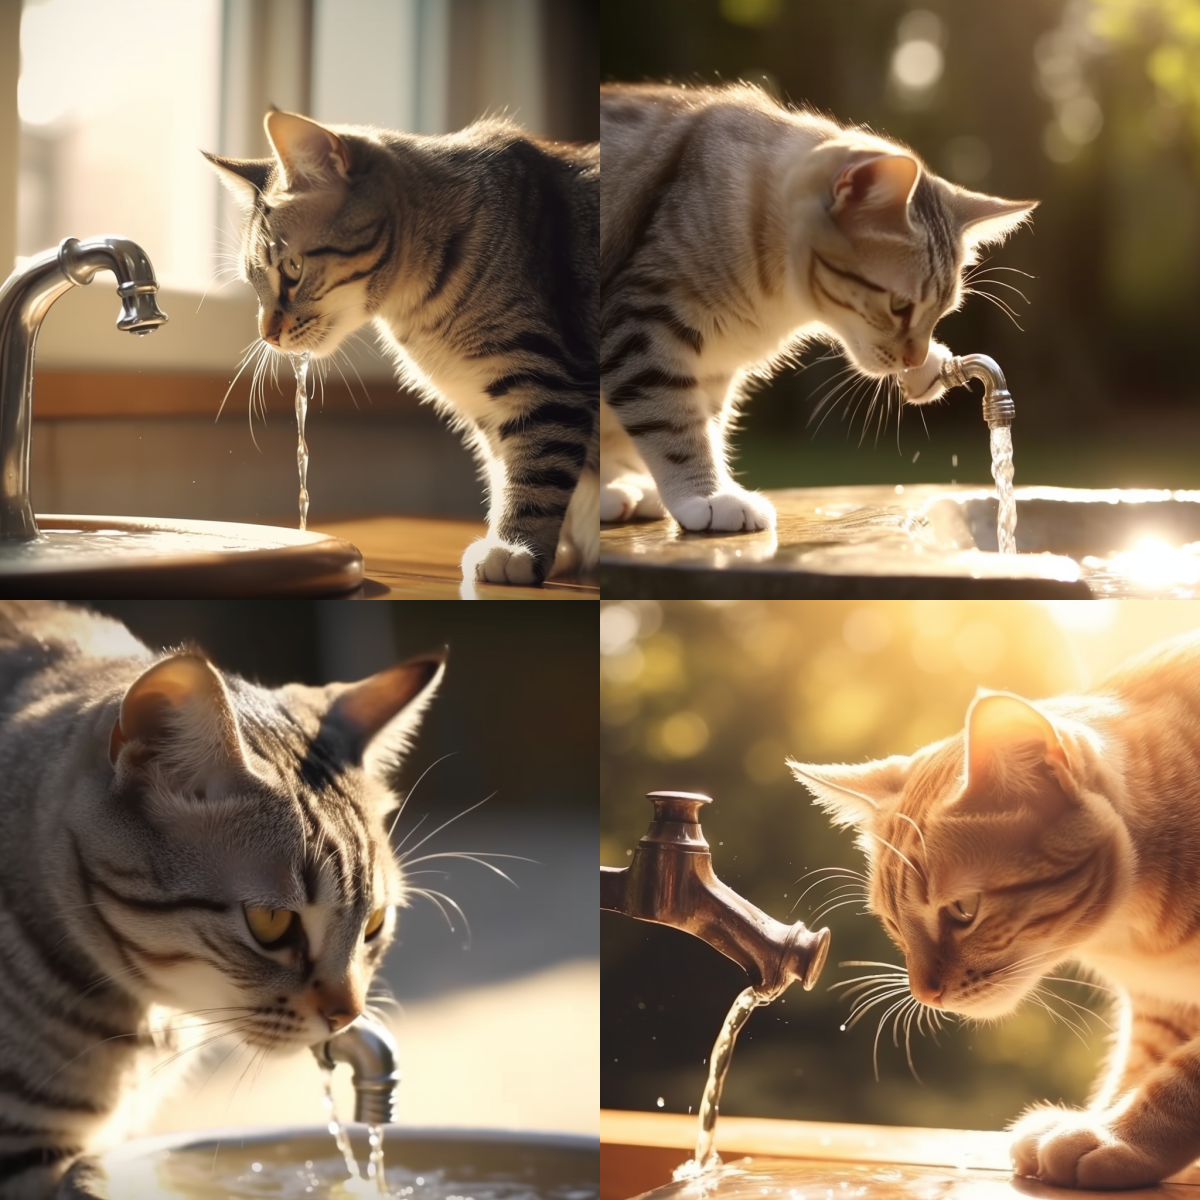 Senwater_a_cute_cat_drinking_water_from_faucet_sunny_4K_1d88b237-9461-4de4-9cee-b7ab7ca351bc